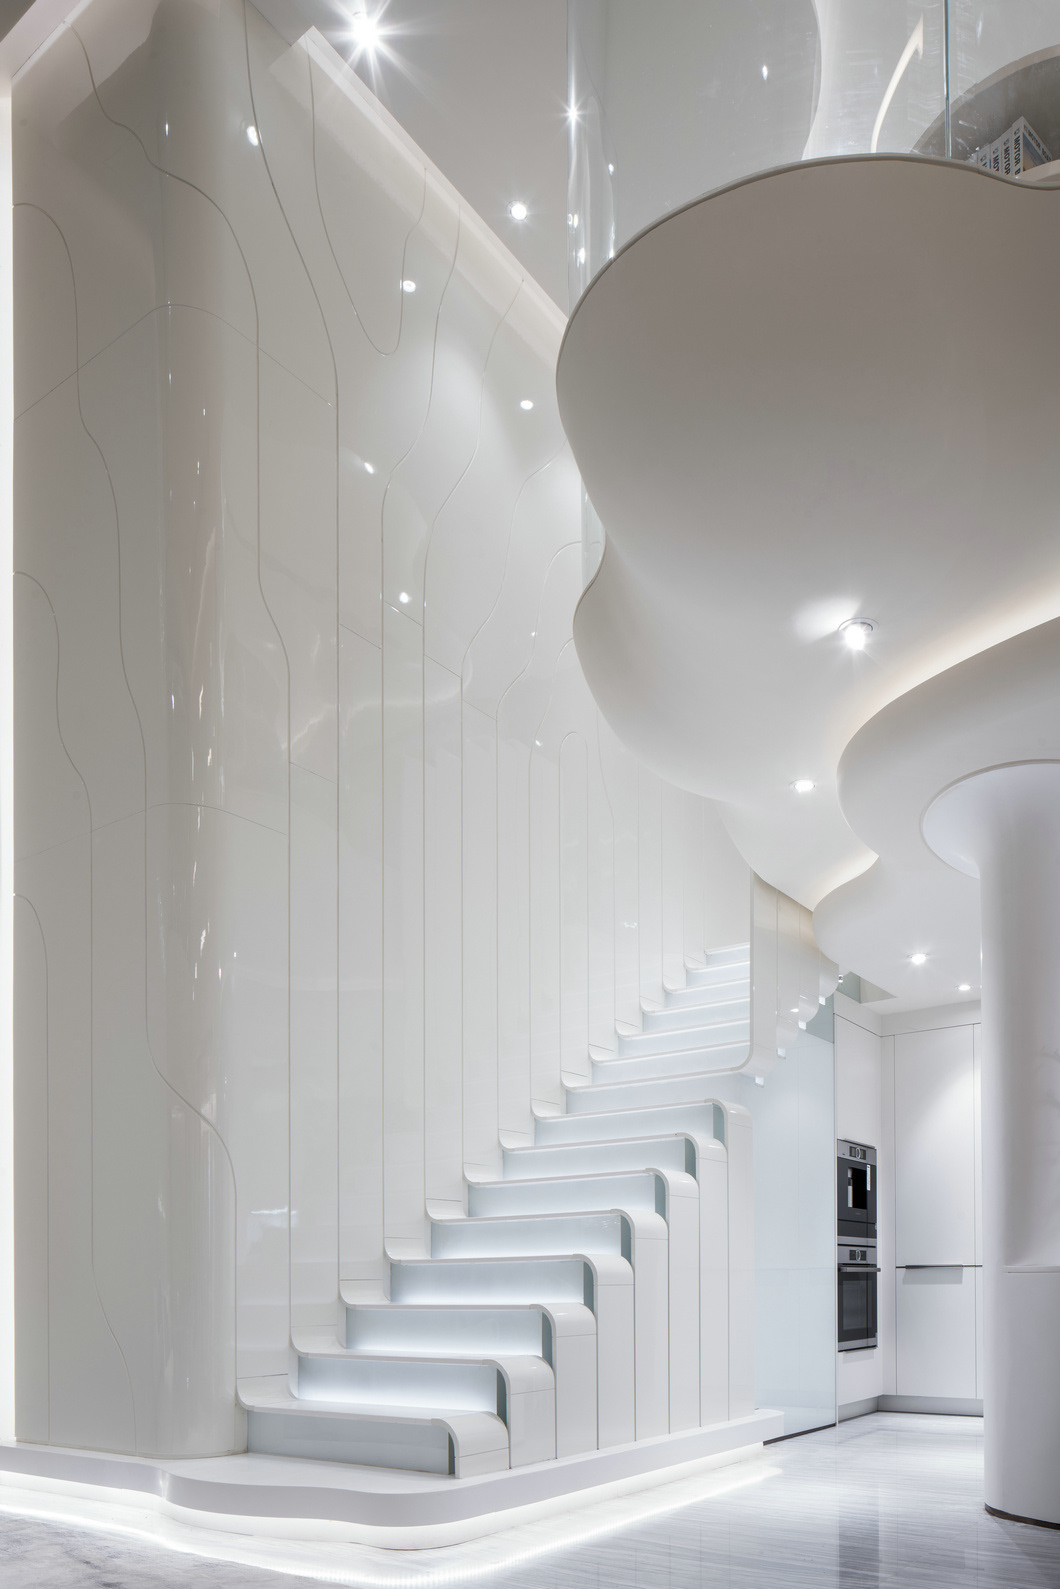 Fulfill a futuristic fantasy. Glossy white steps merge with light reflective wall panels in this futuristic home design. Softly glowing stair lights accentuate the recessed risers.